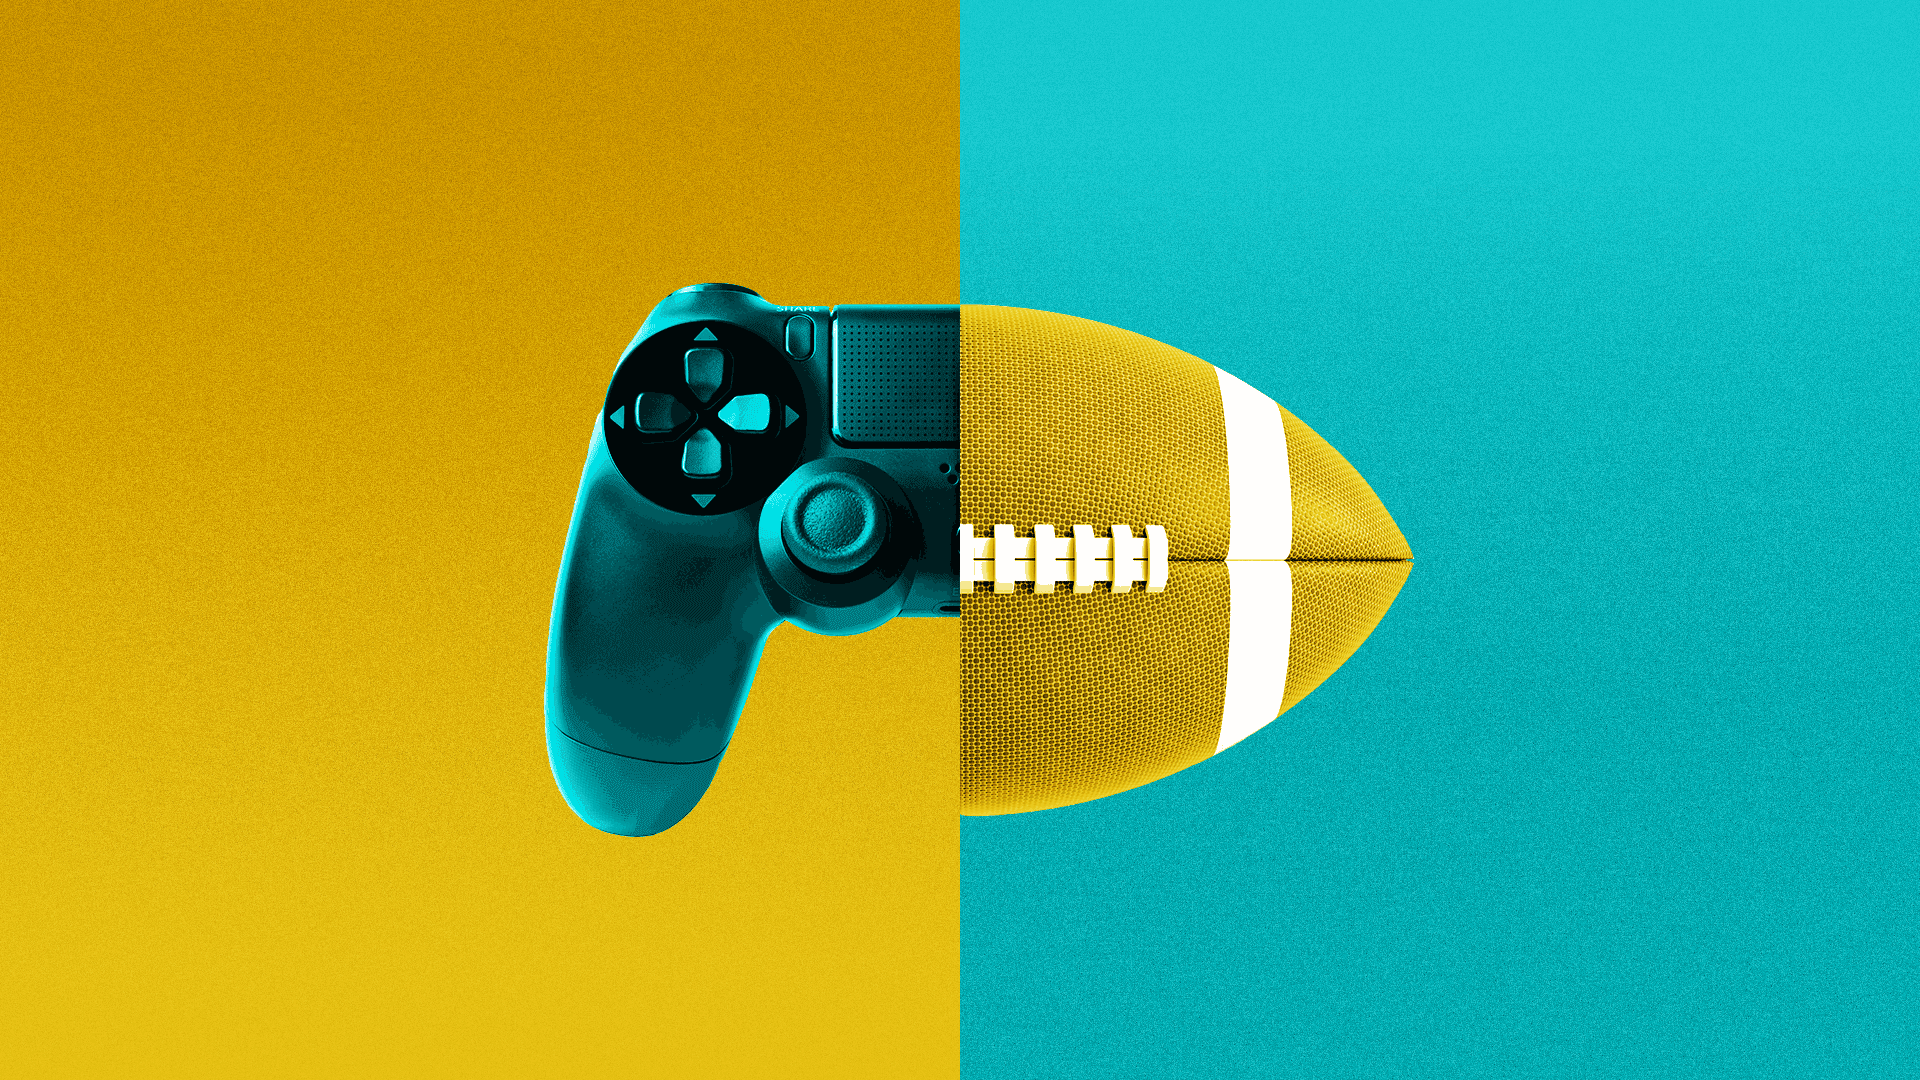 Illustration of sports and gaming